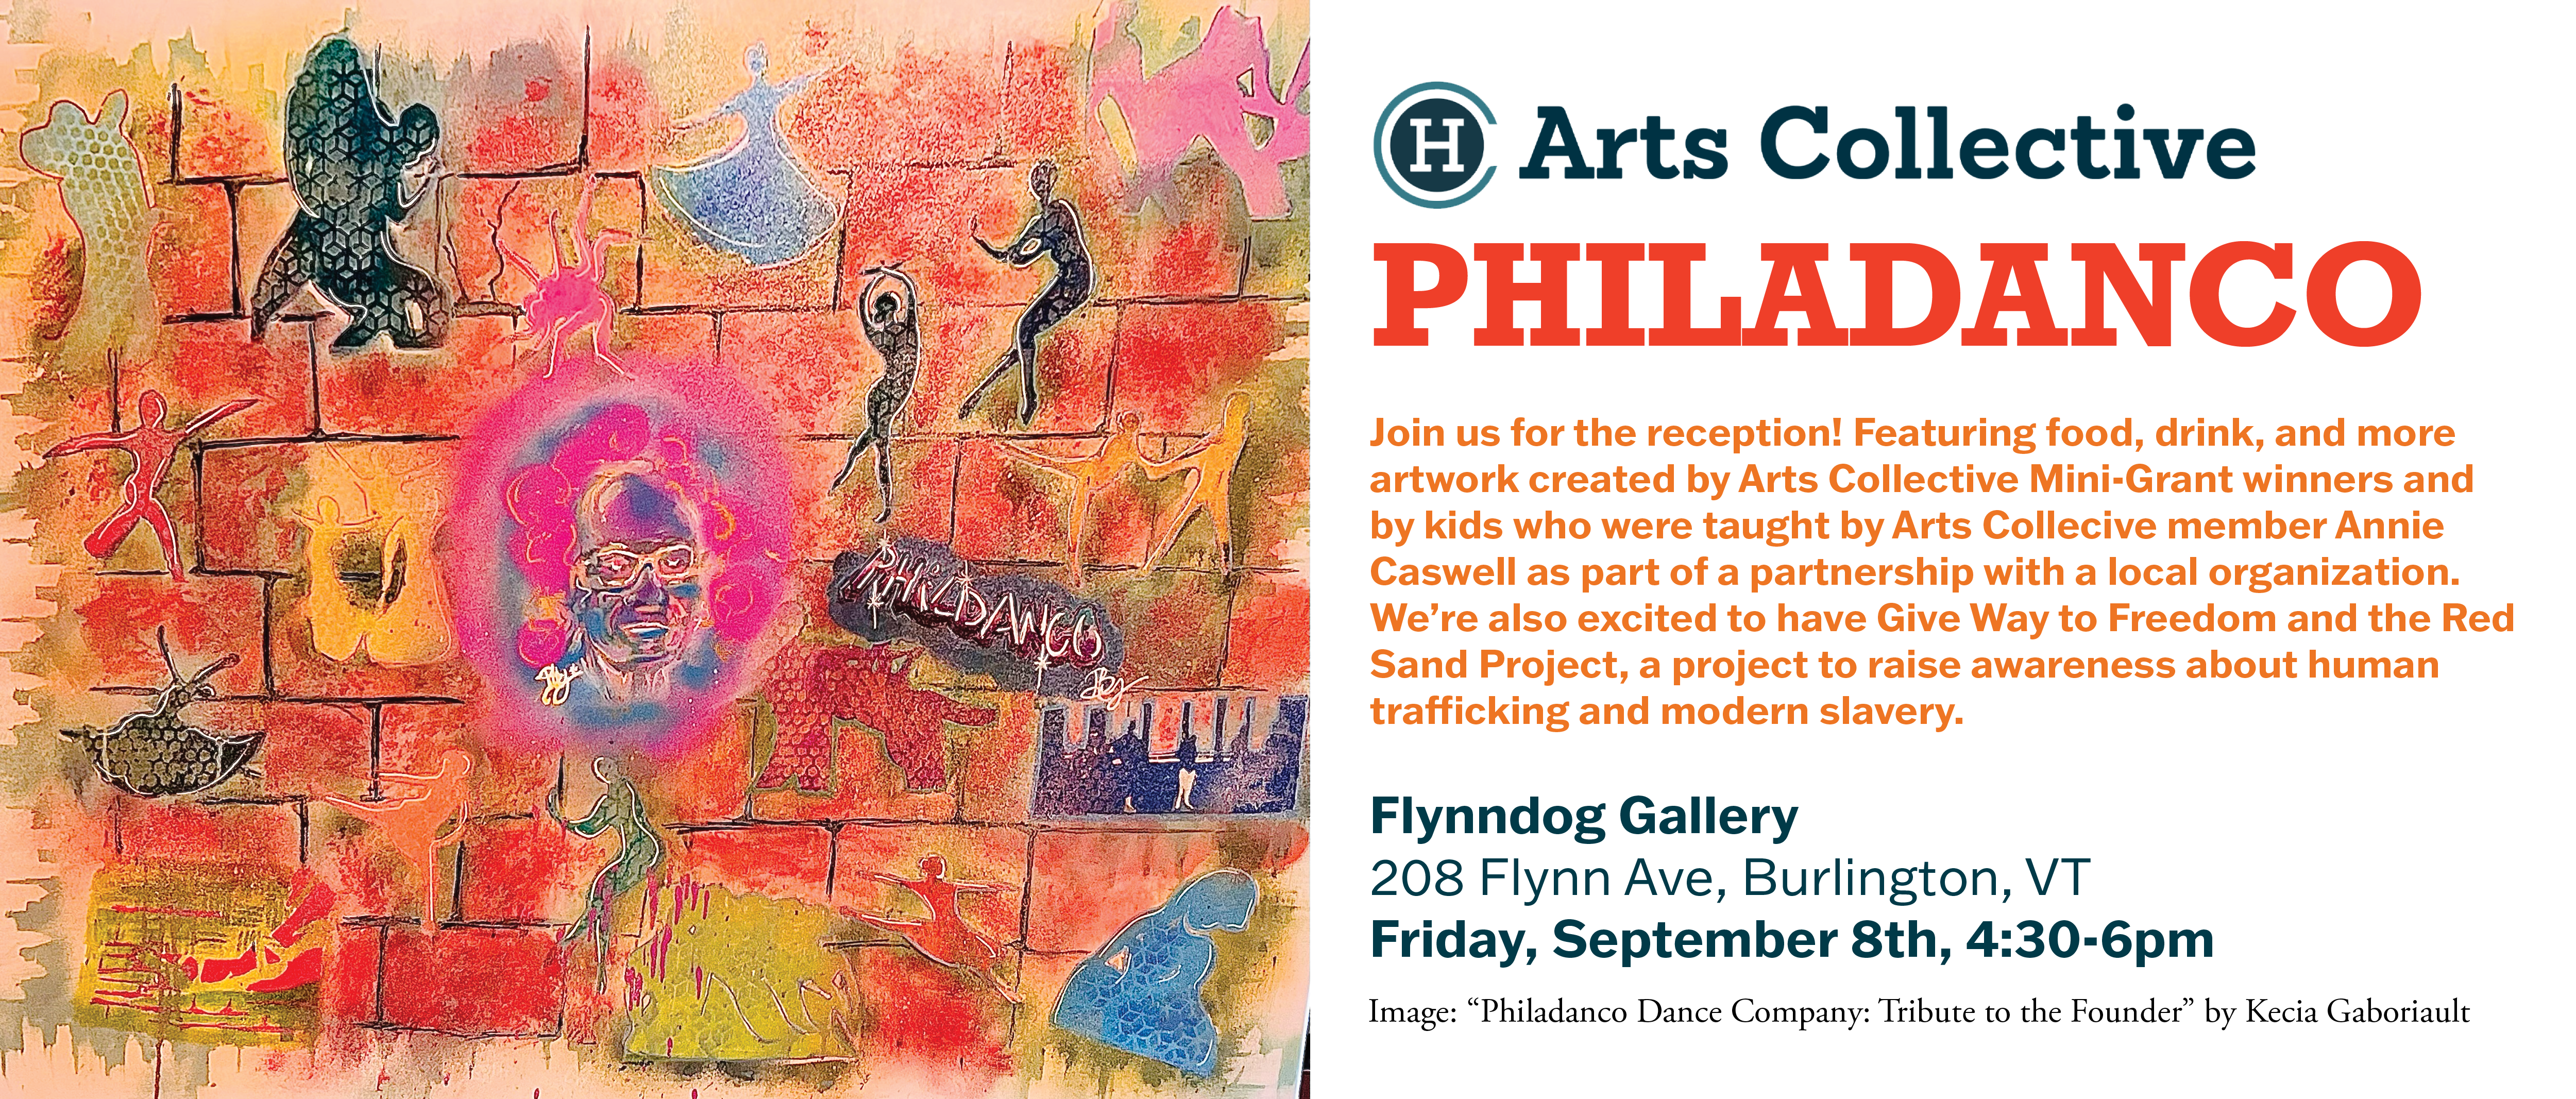 Philadanco Join us for the reception! Featuring food, drink, and more artwork created by Arts Collective Mini-Grant winners and by kids who were taught by Arts Collective member Annie Caswell as part of a partnership with a local organization. We're also excited to have Give Way to Freedom and the Red Sand Project, a project to raise awareness about human trafficking and modern slavery.